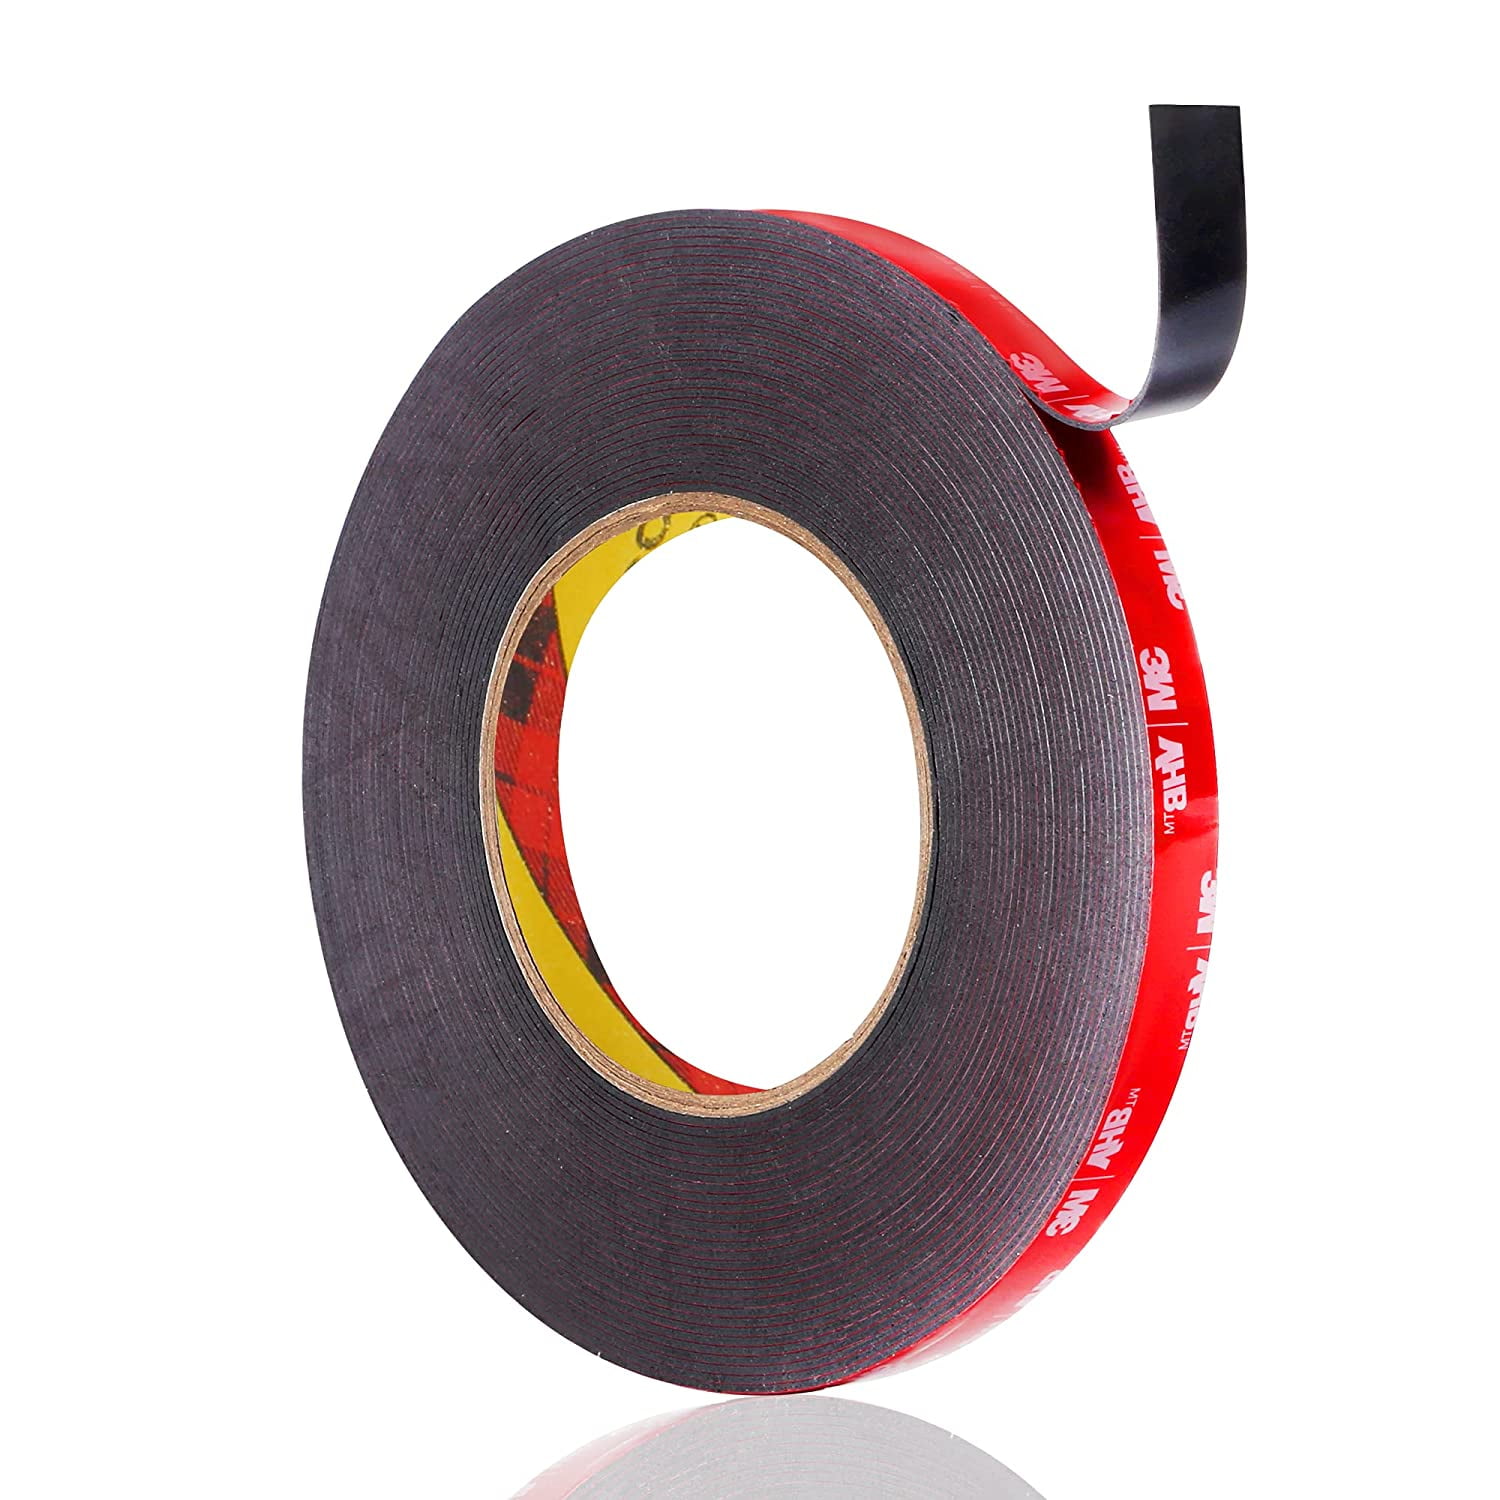 3M Double Sided Tape Mounting Tape Heavy Duty,3M Foam Tape Office Decor 16.4FT Length Home Decor 0.98 Inch Width for Car 